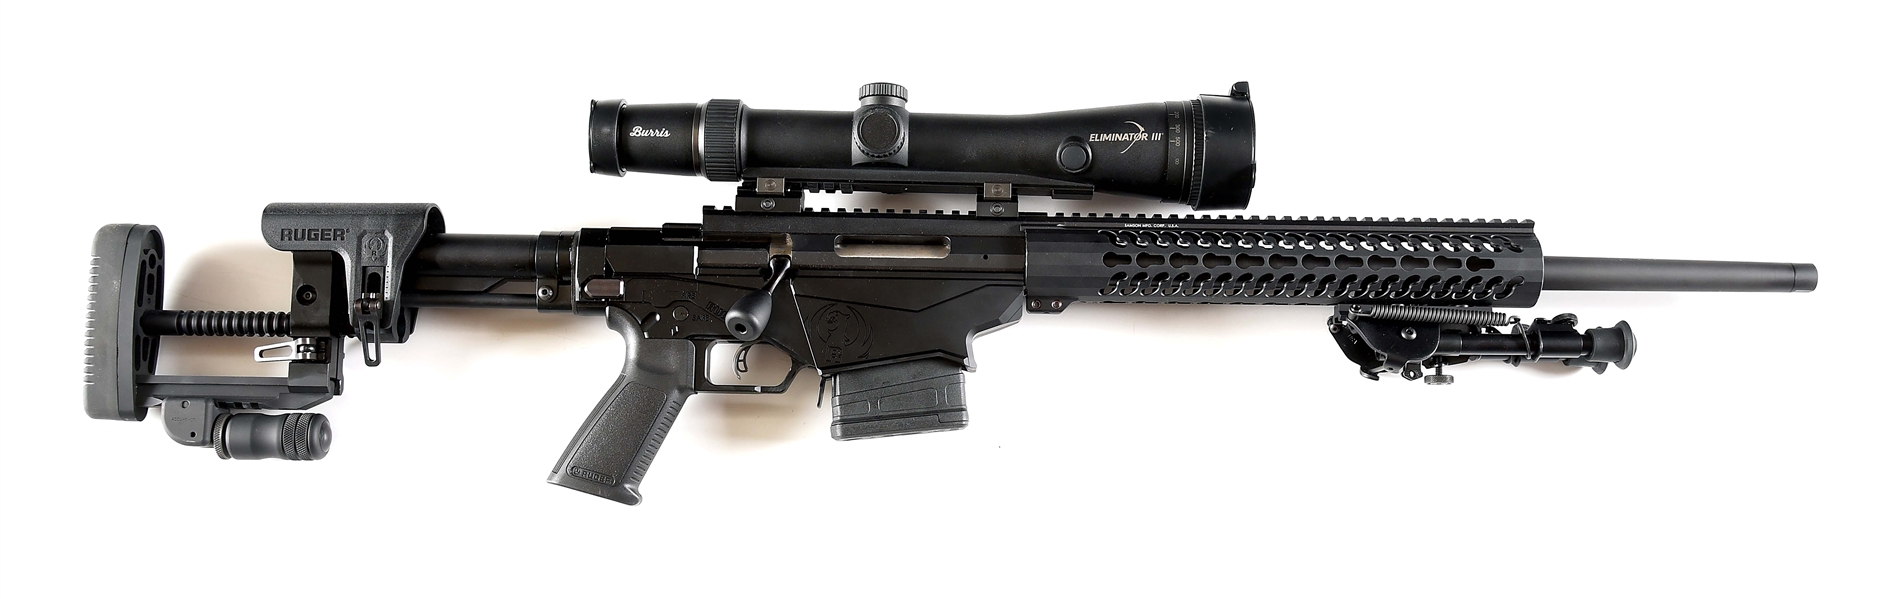 (M) RUGER PRECISION RIFLE WITH BURRIS ELIMINATOR III AND BOXES.